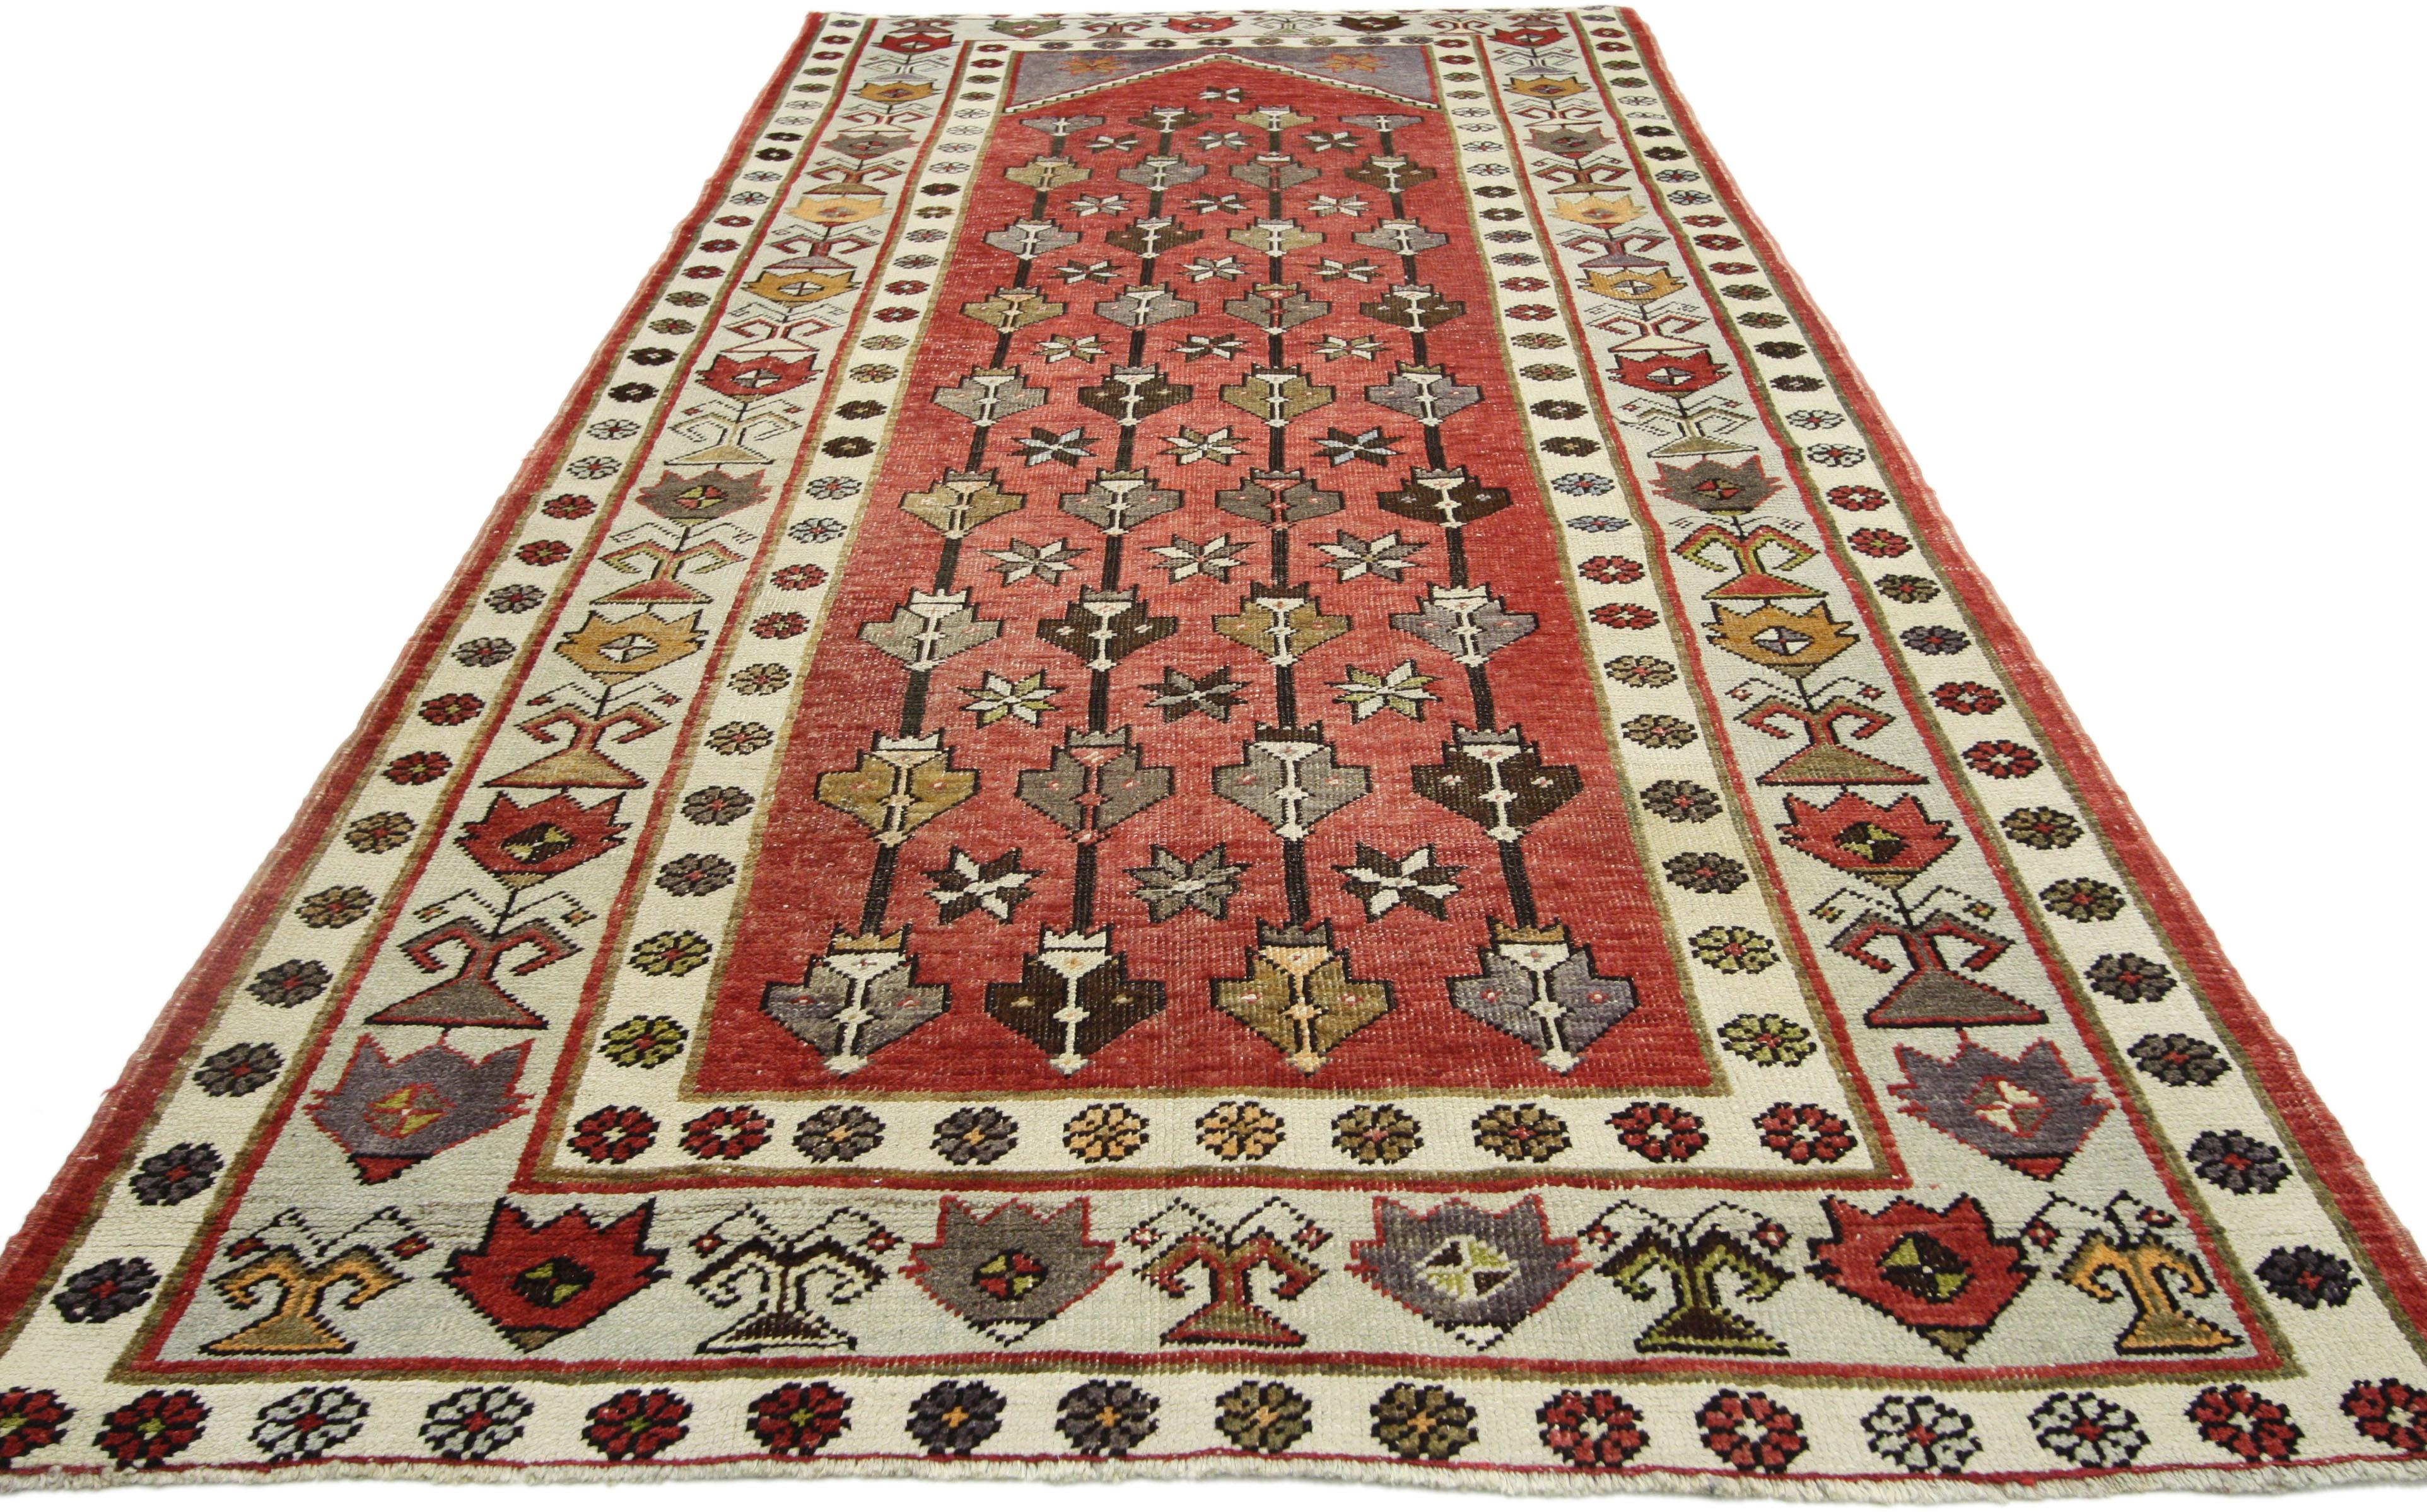 52420 vintage Turkish Oushak runner, wide hallway runner. With its bright red field and faded eggplant spandrels, this hand knotted wool vintage Turkish Oushak runner is a woven beauty of contrasting vibrant and earth tones. Ancient symbolism